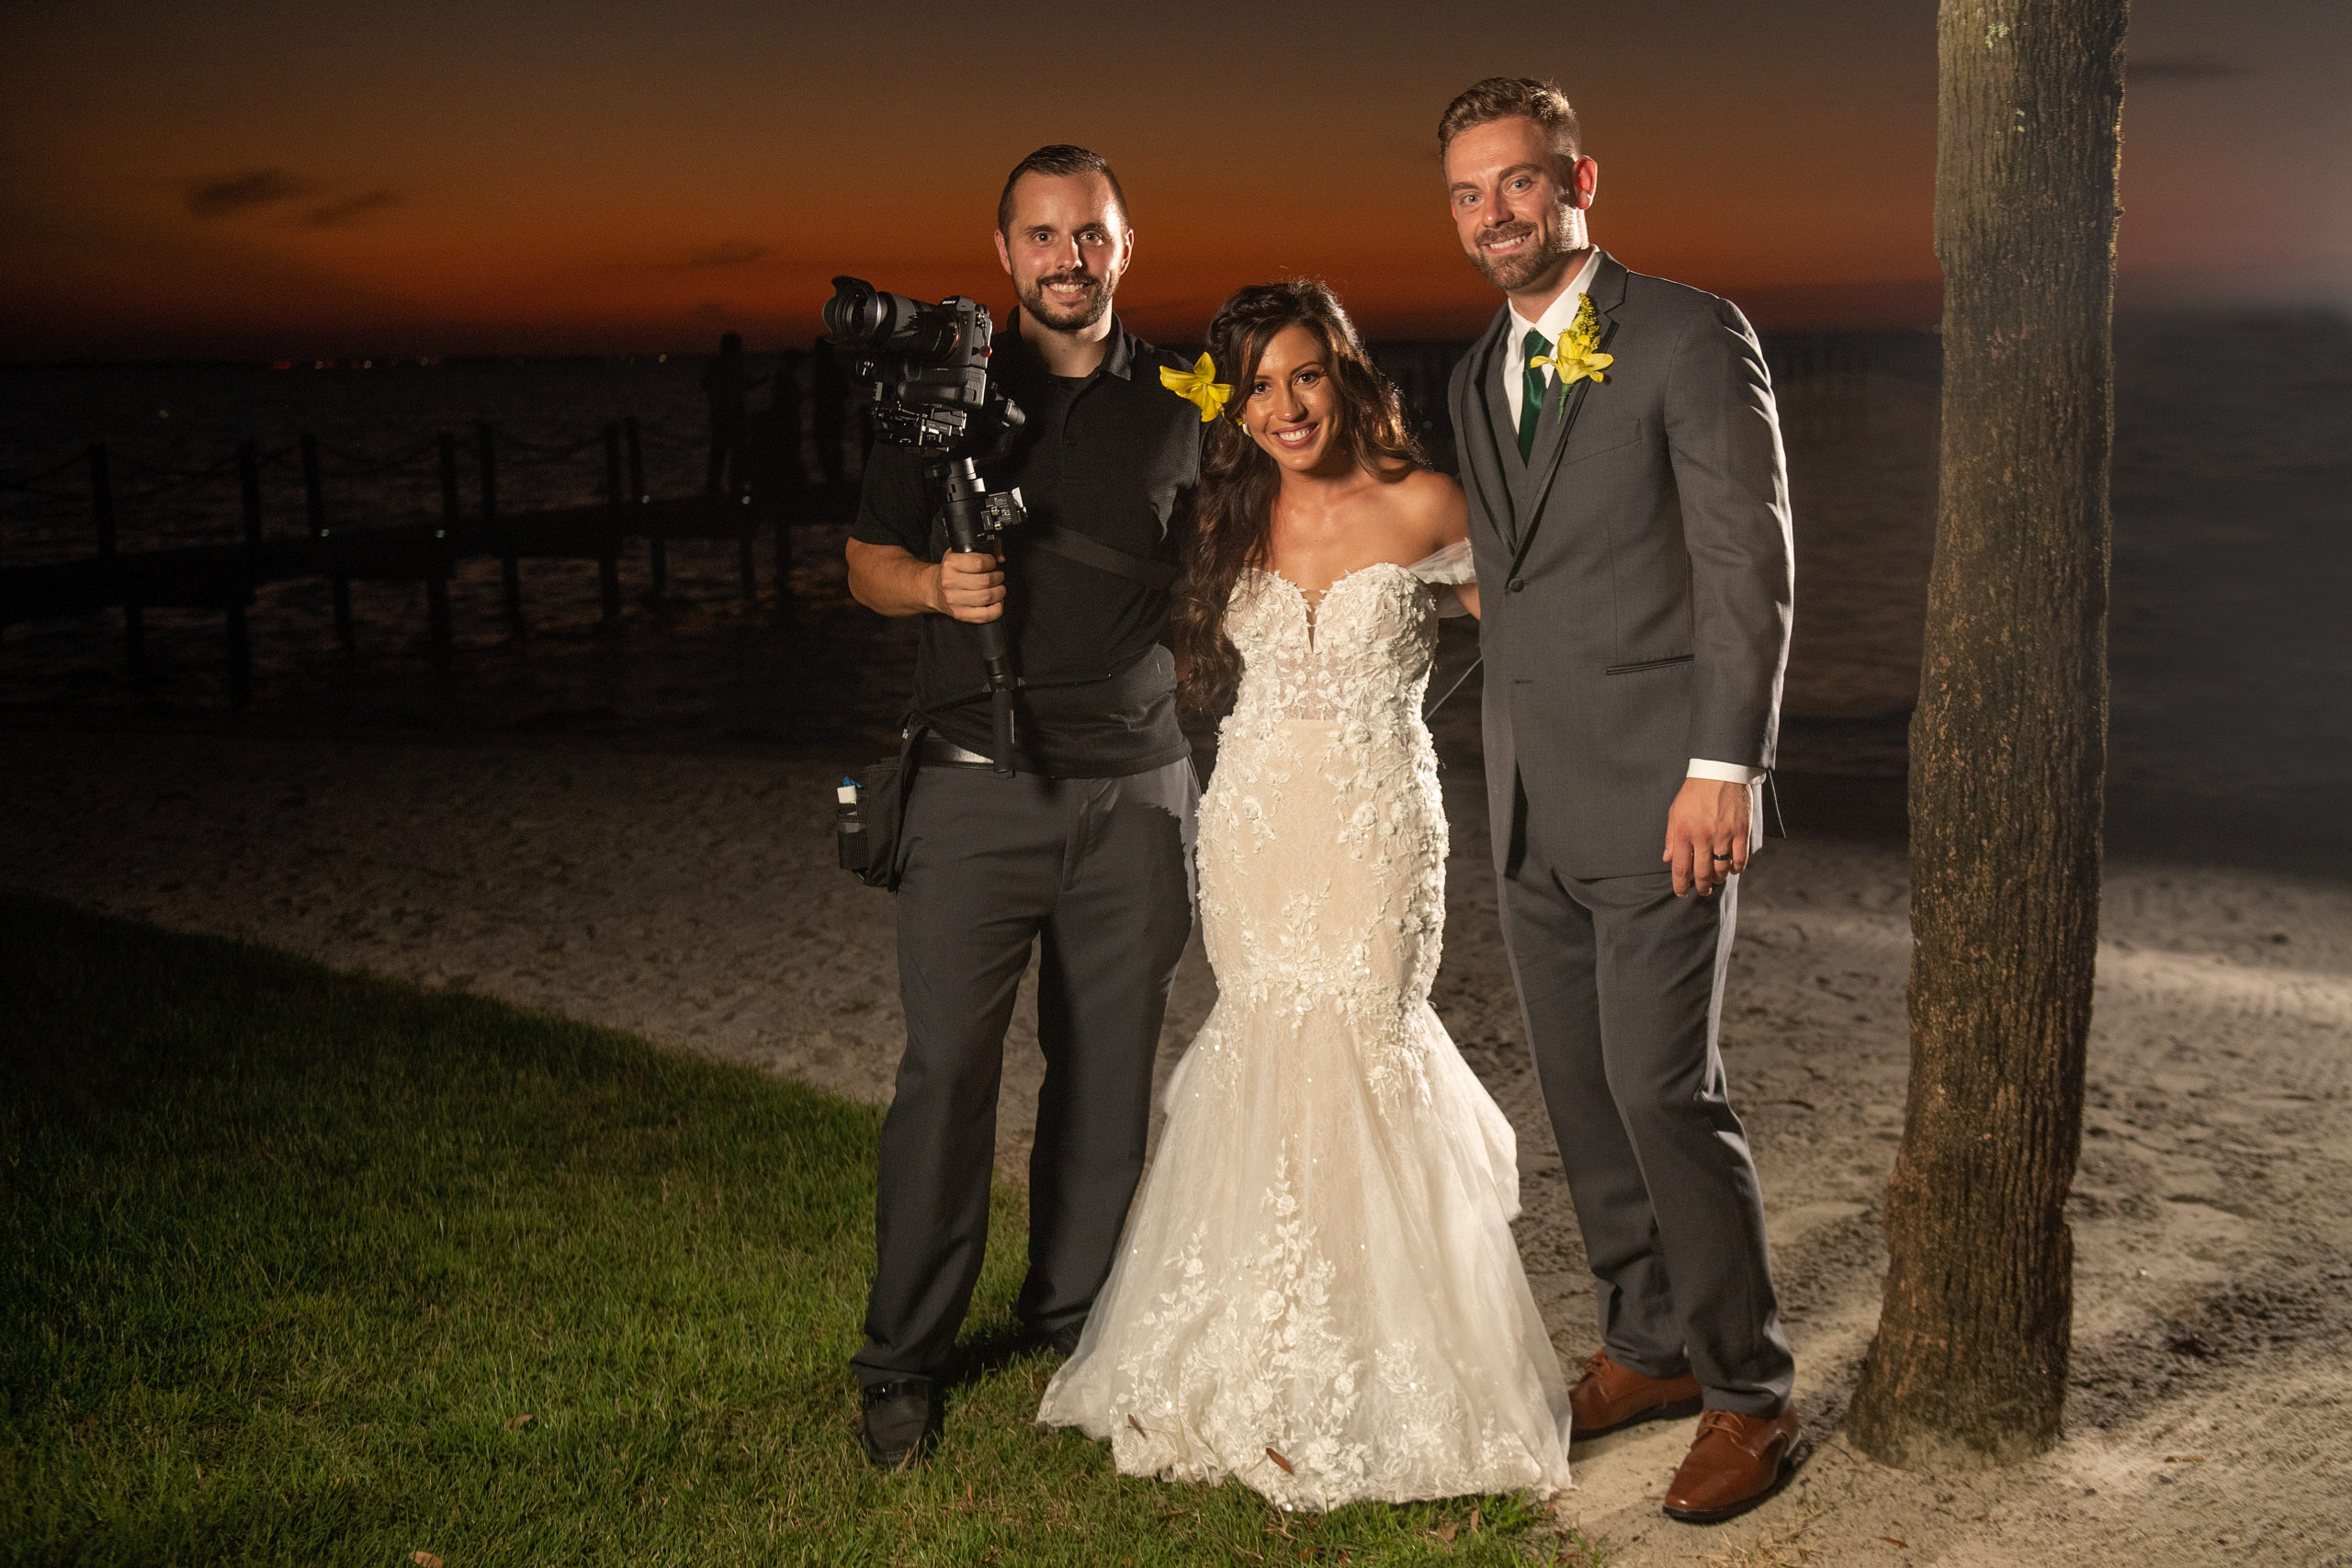 Finding the Right Tampa Wedding Photographer